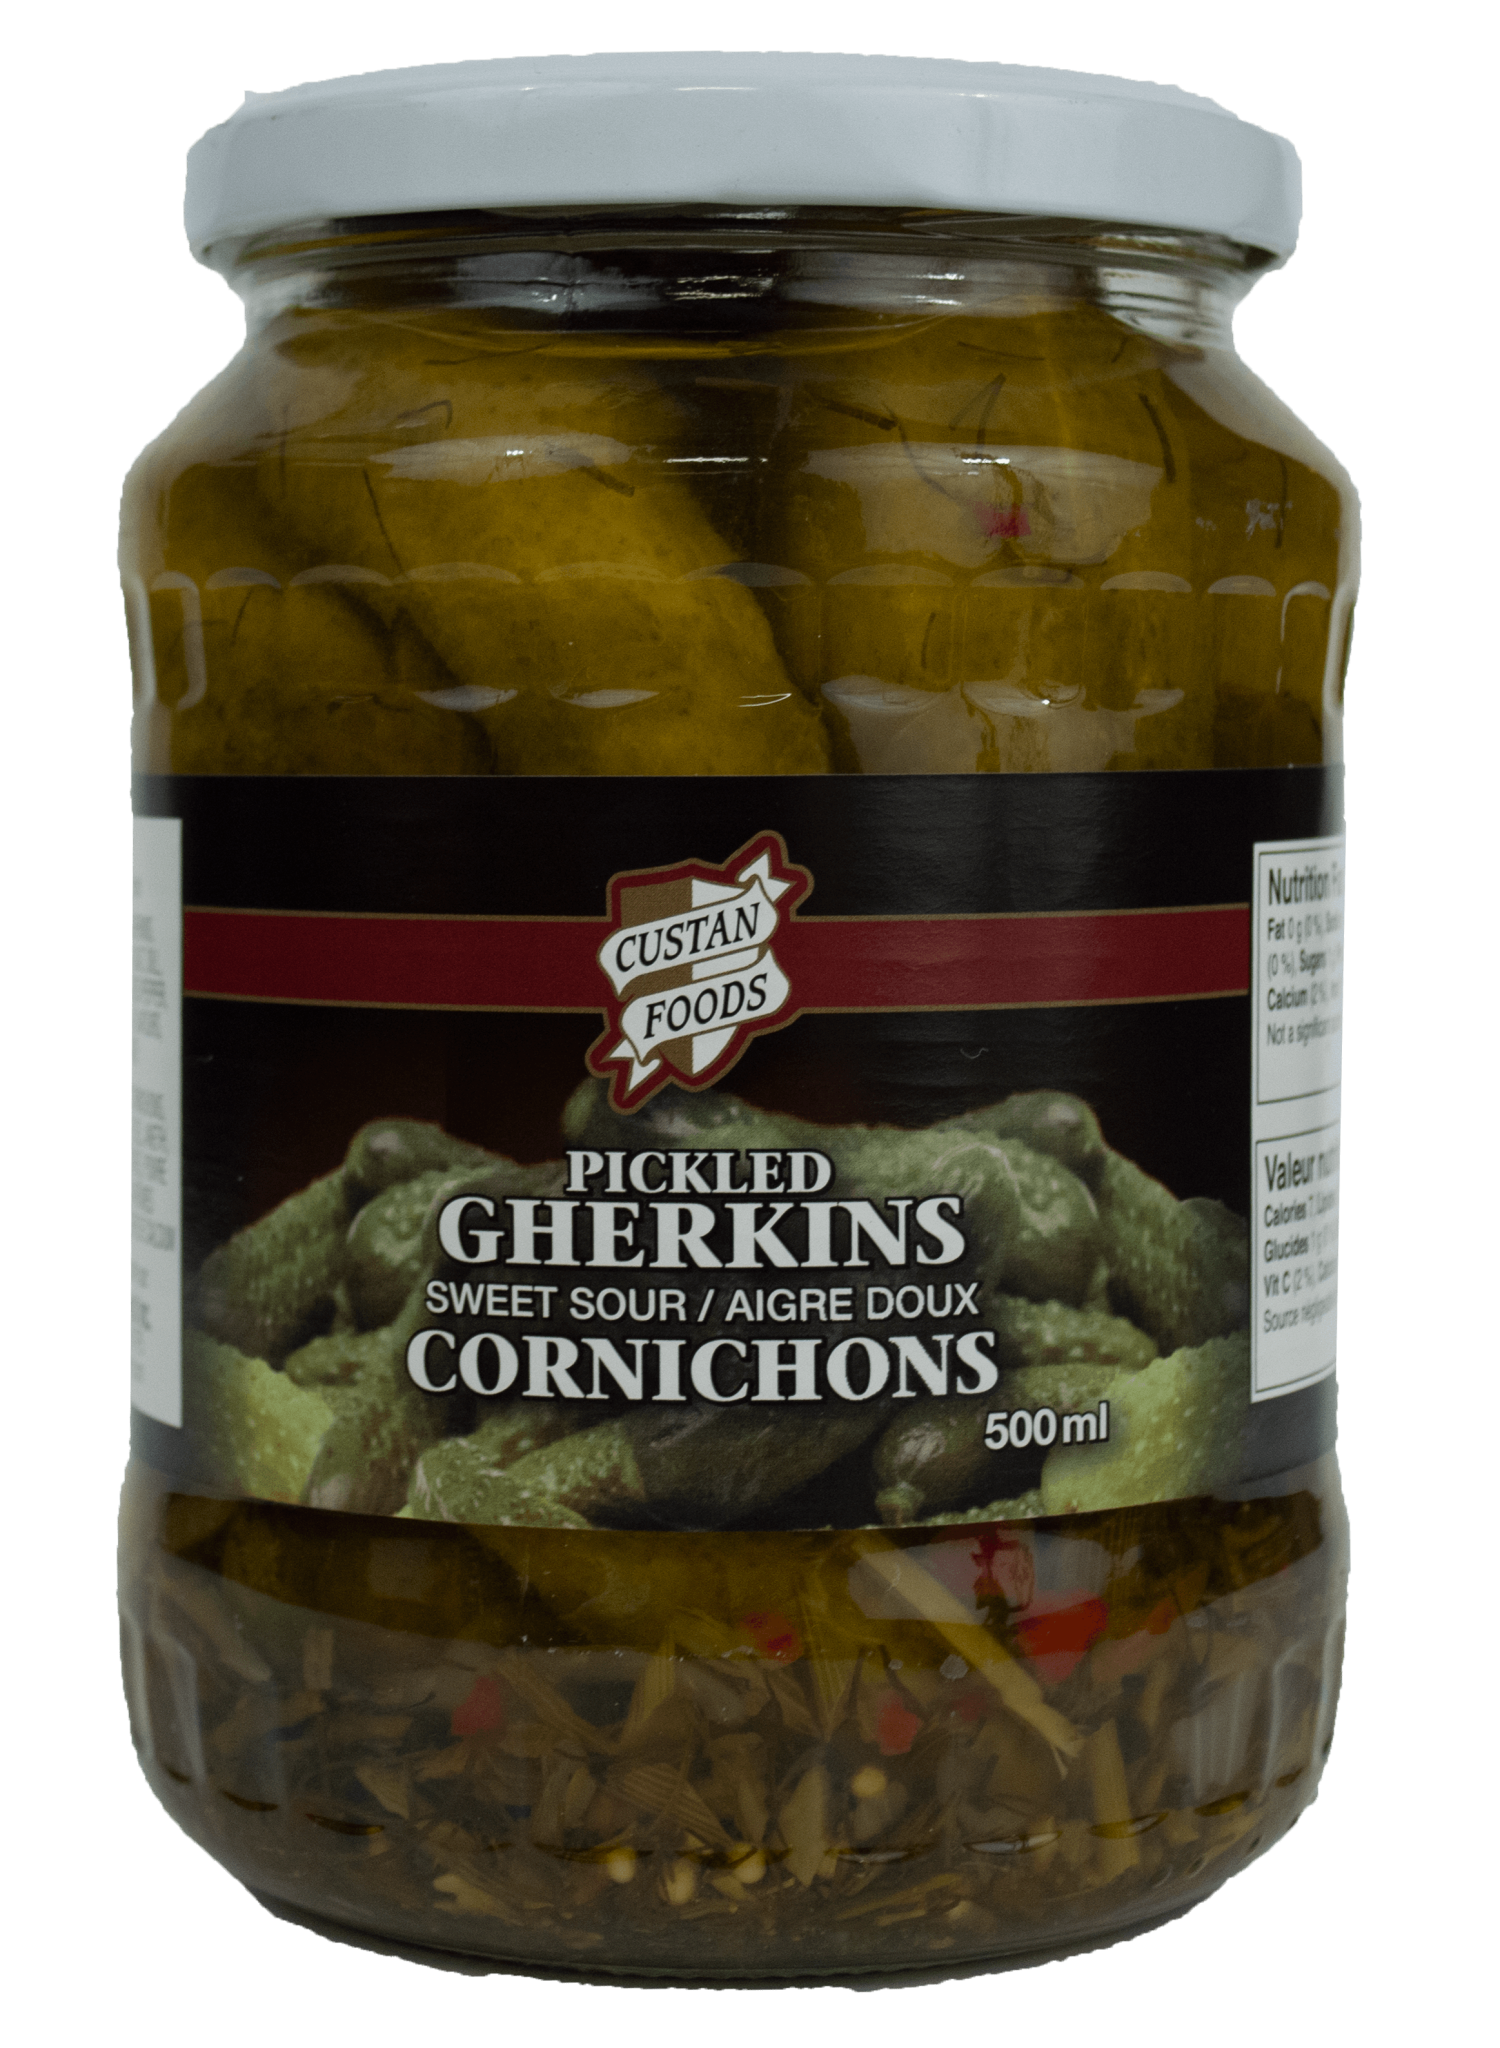 Custan Foods Sweet and Sour Pickled Gherkins 500ml - The Dutch Shop